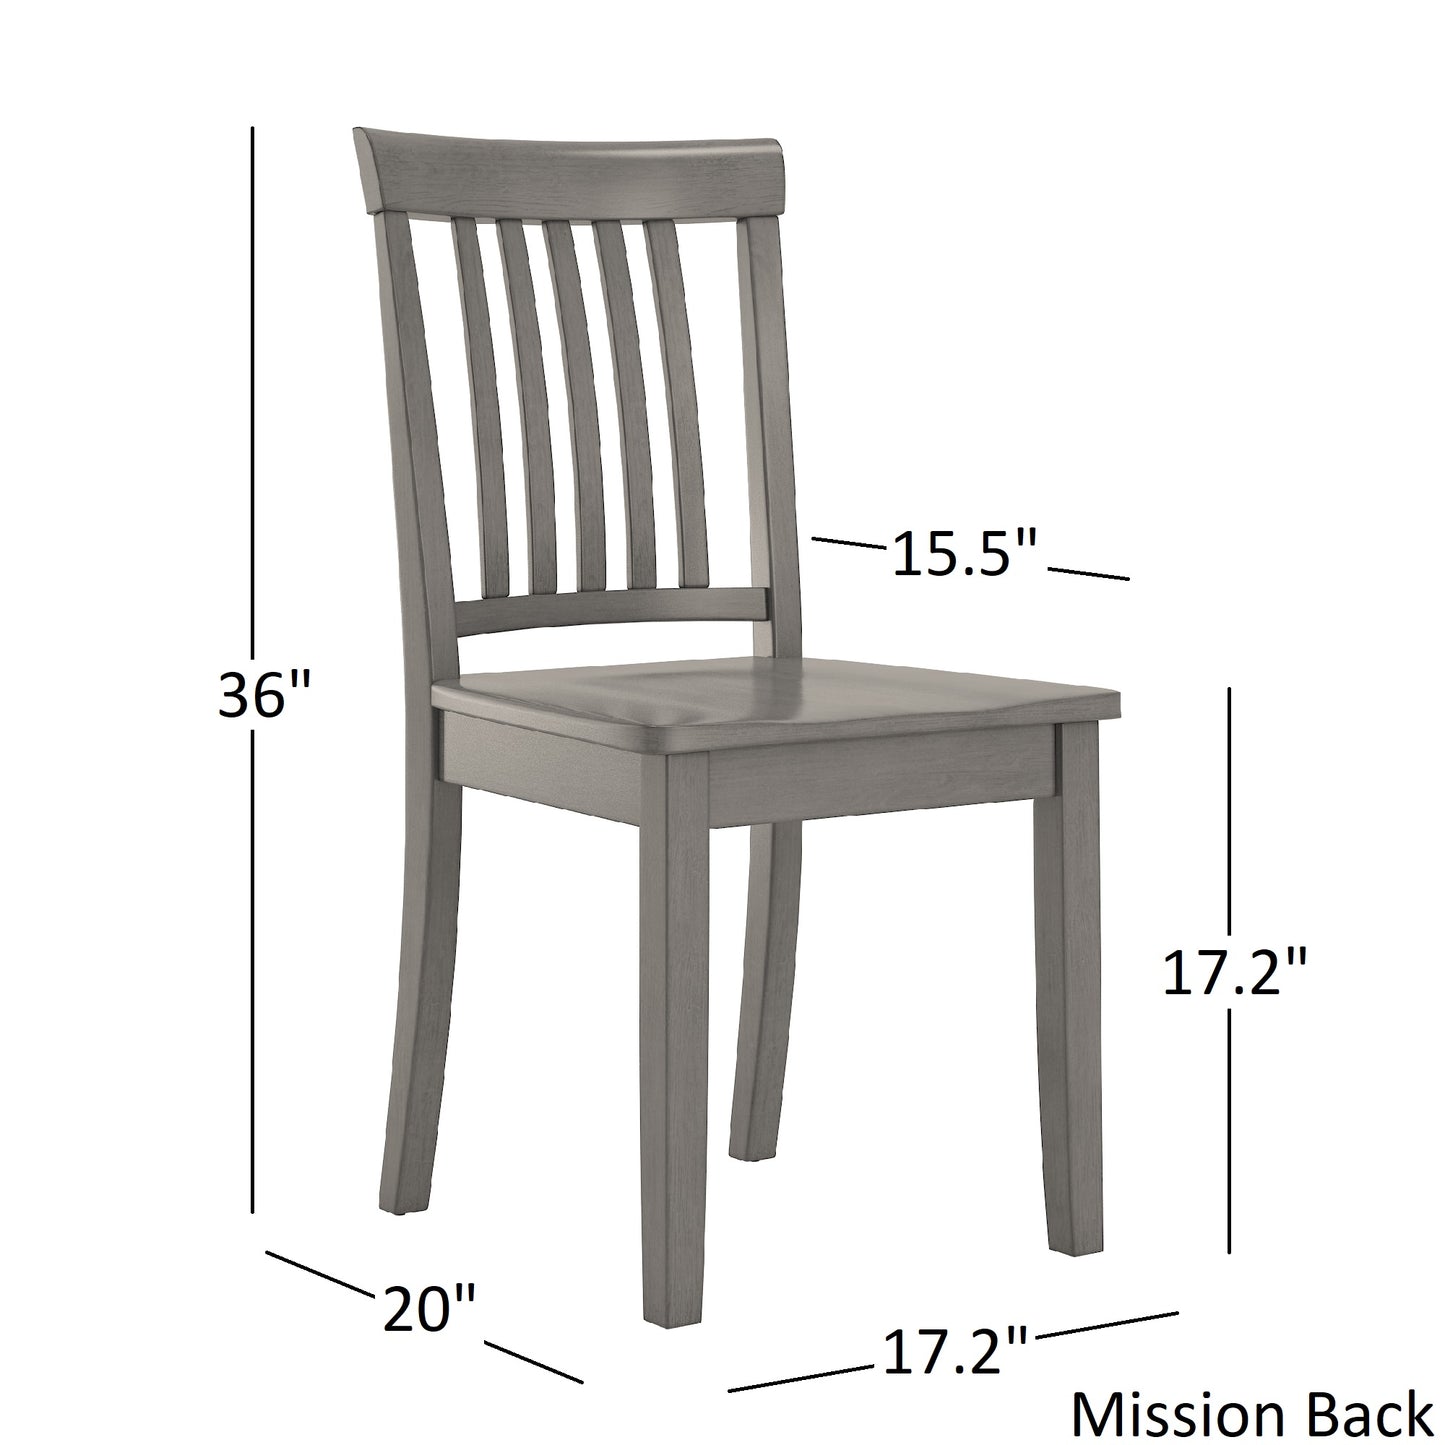 Two-Tone Round 5-Piece Dining Set - Antique Grey Finish, Mission Back Chairs